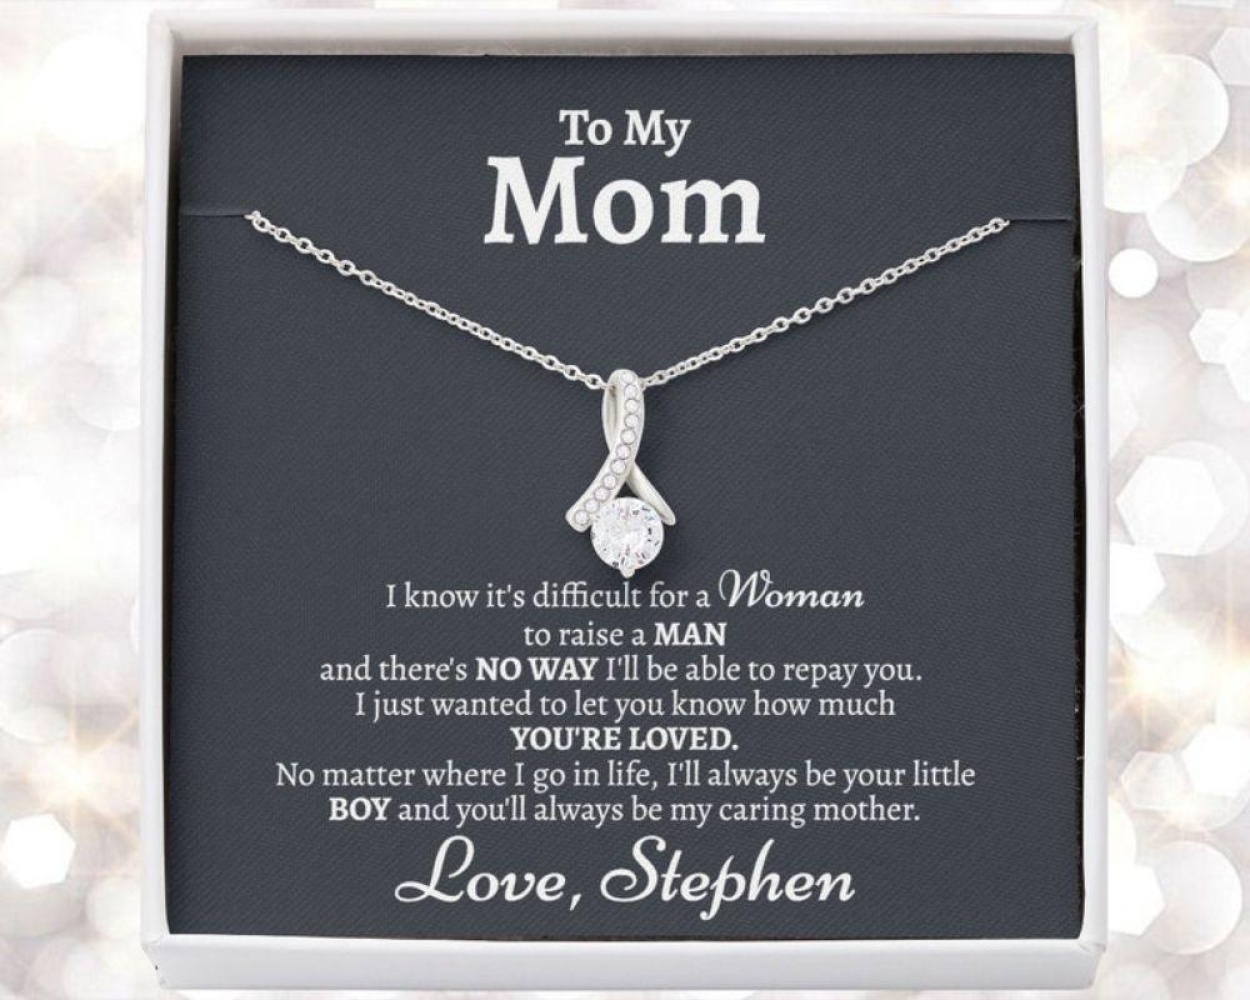 Mom Necklace, Mom Son Necklace, Birthday Necklace Gift Idea For Mom From Son, Sentimental Gift For Mom From Son, Mother Son Gift